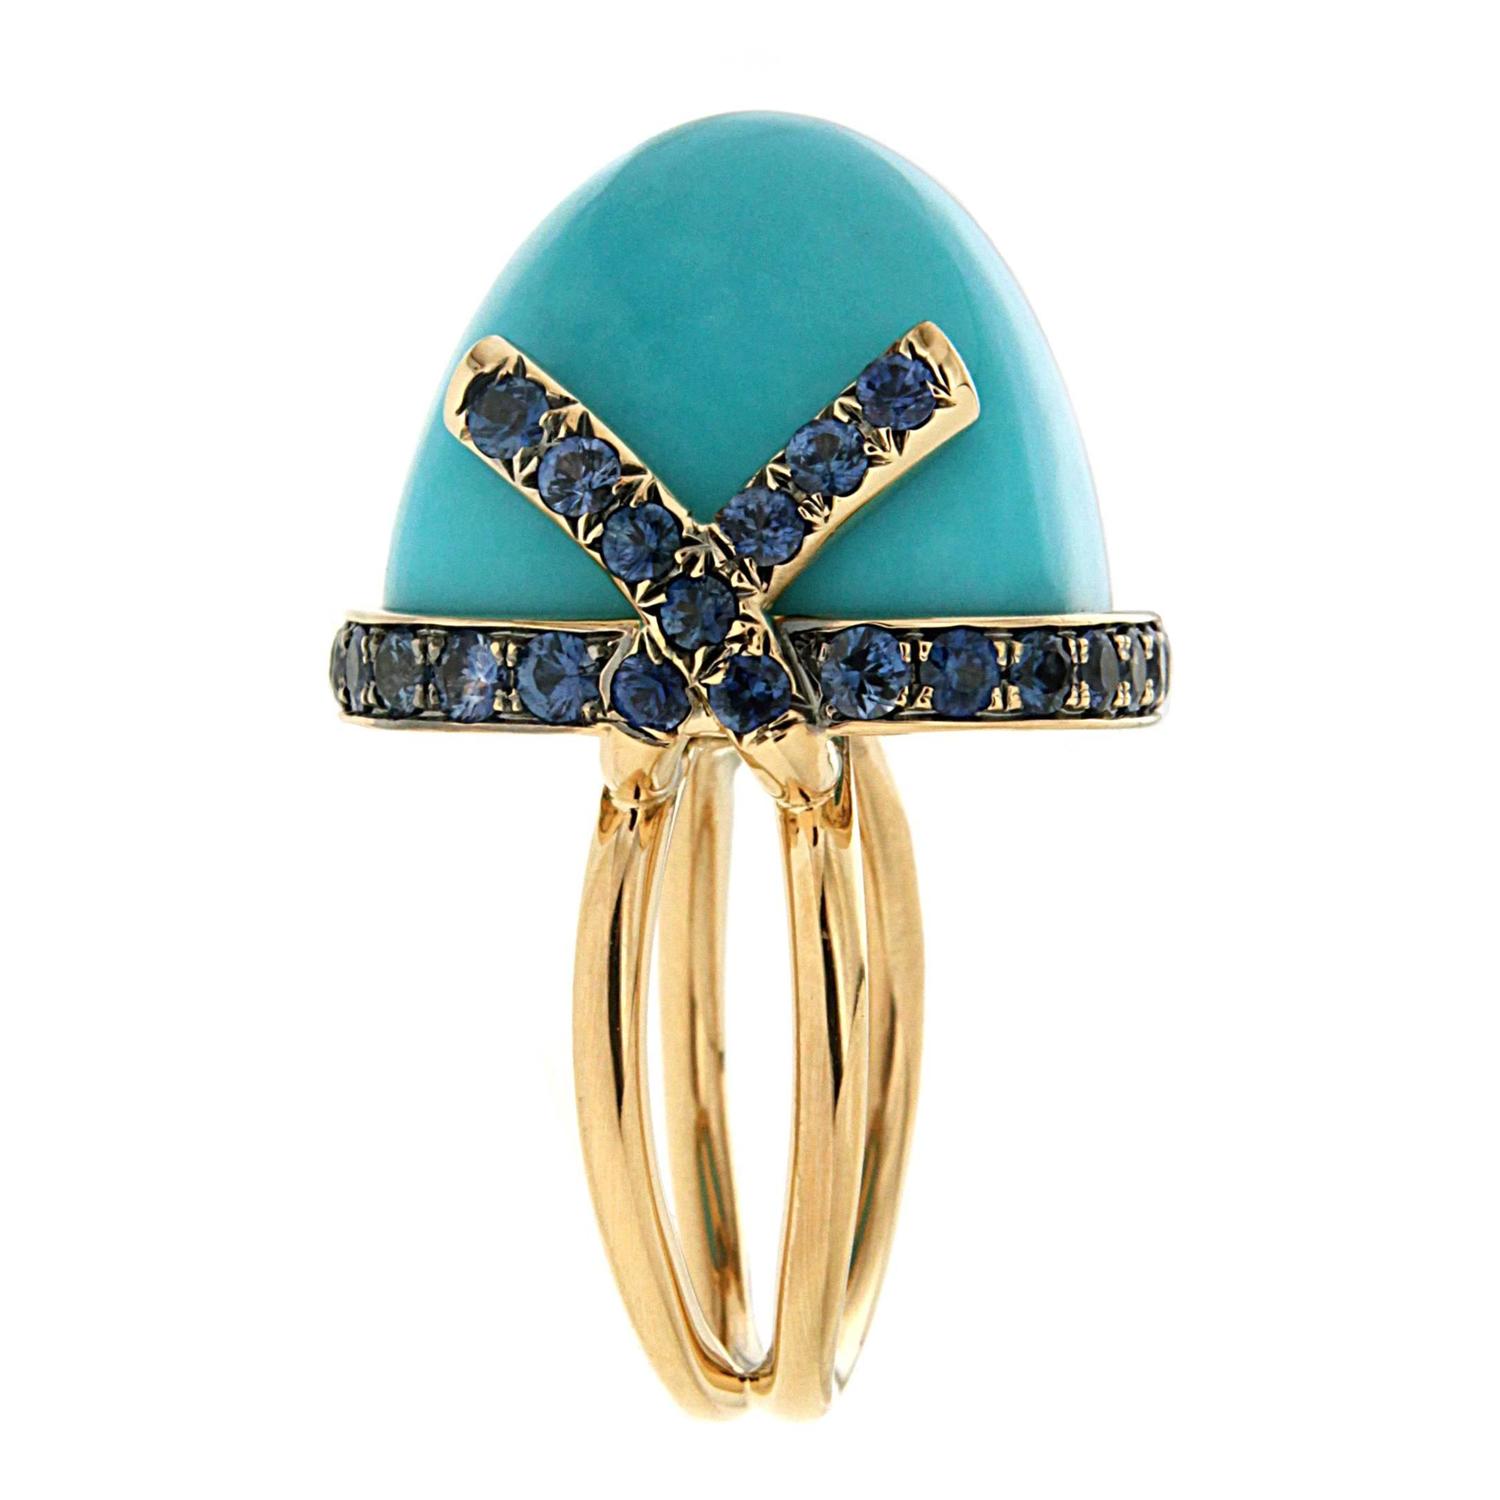 Cabochon Turquoise Ring with Blue Sapphires and Diamond Tips at 1stdibs